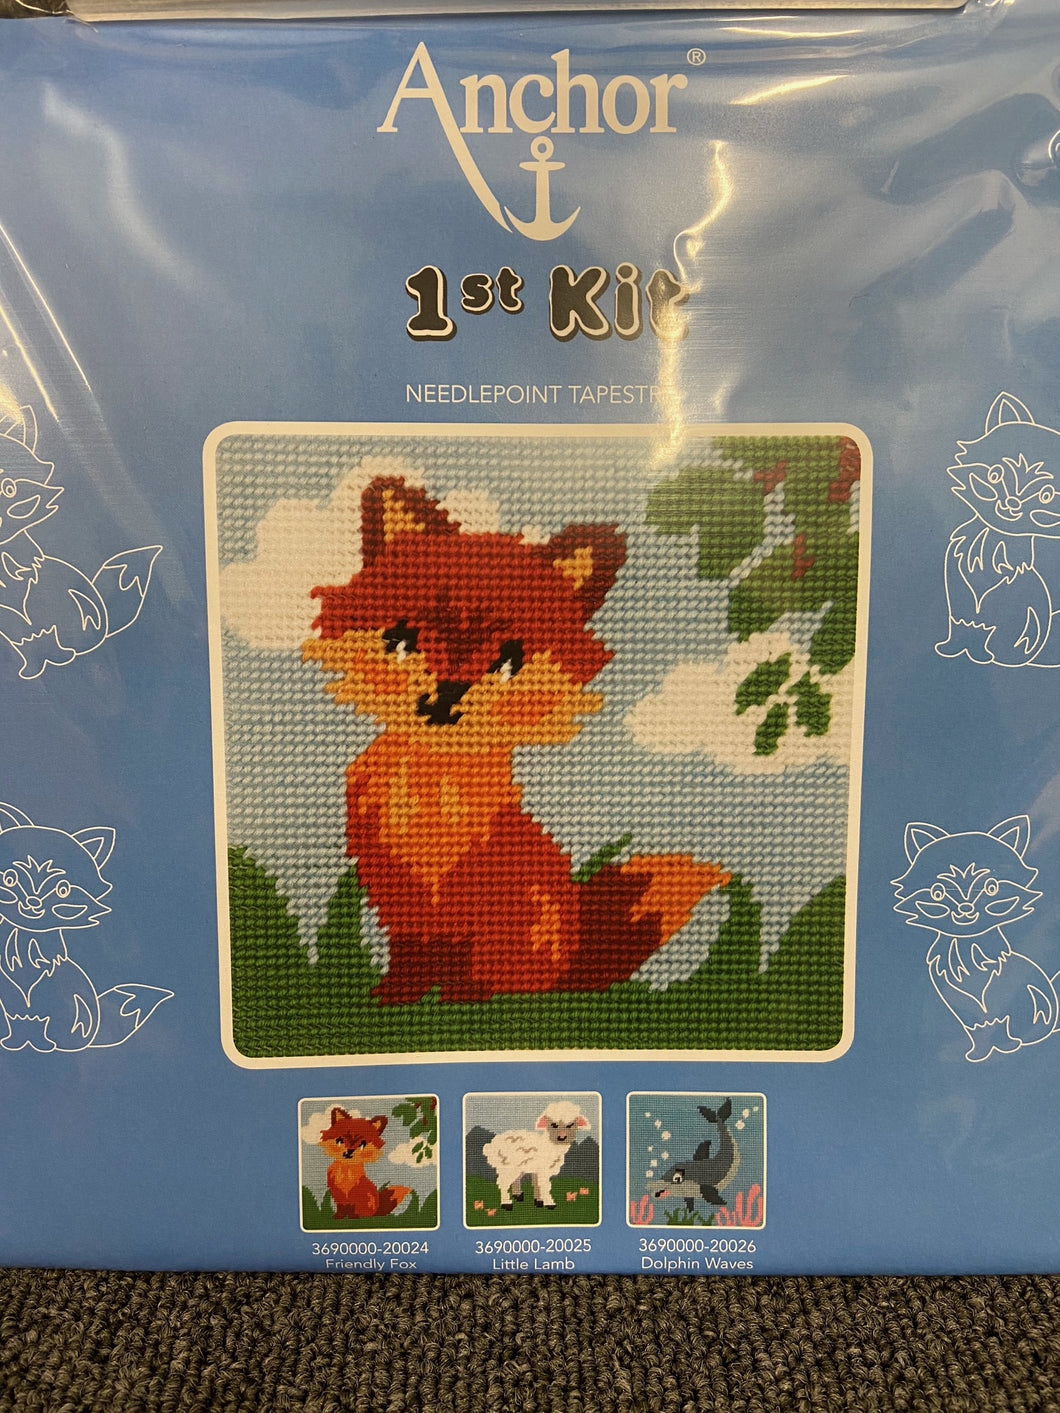 fabric shack sewing sew tapestry needlepoint kits kit first 1st childs kids friendly fox 3690000-20024